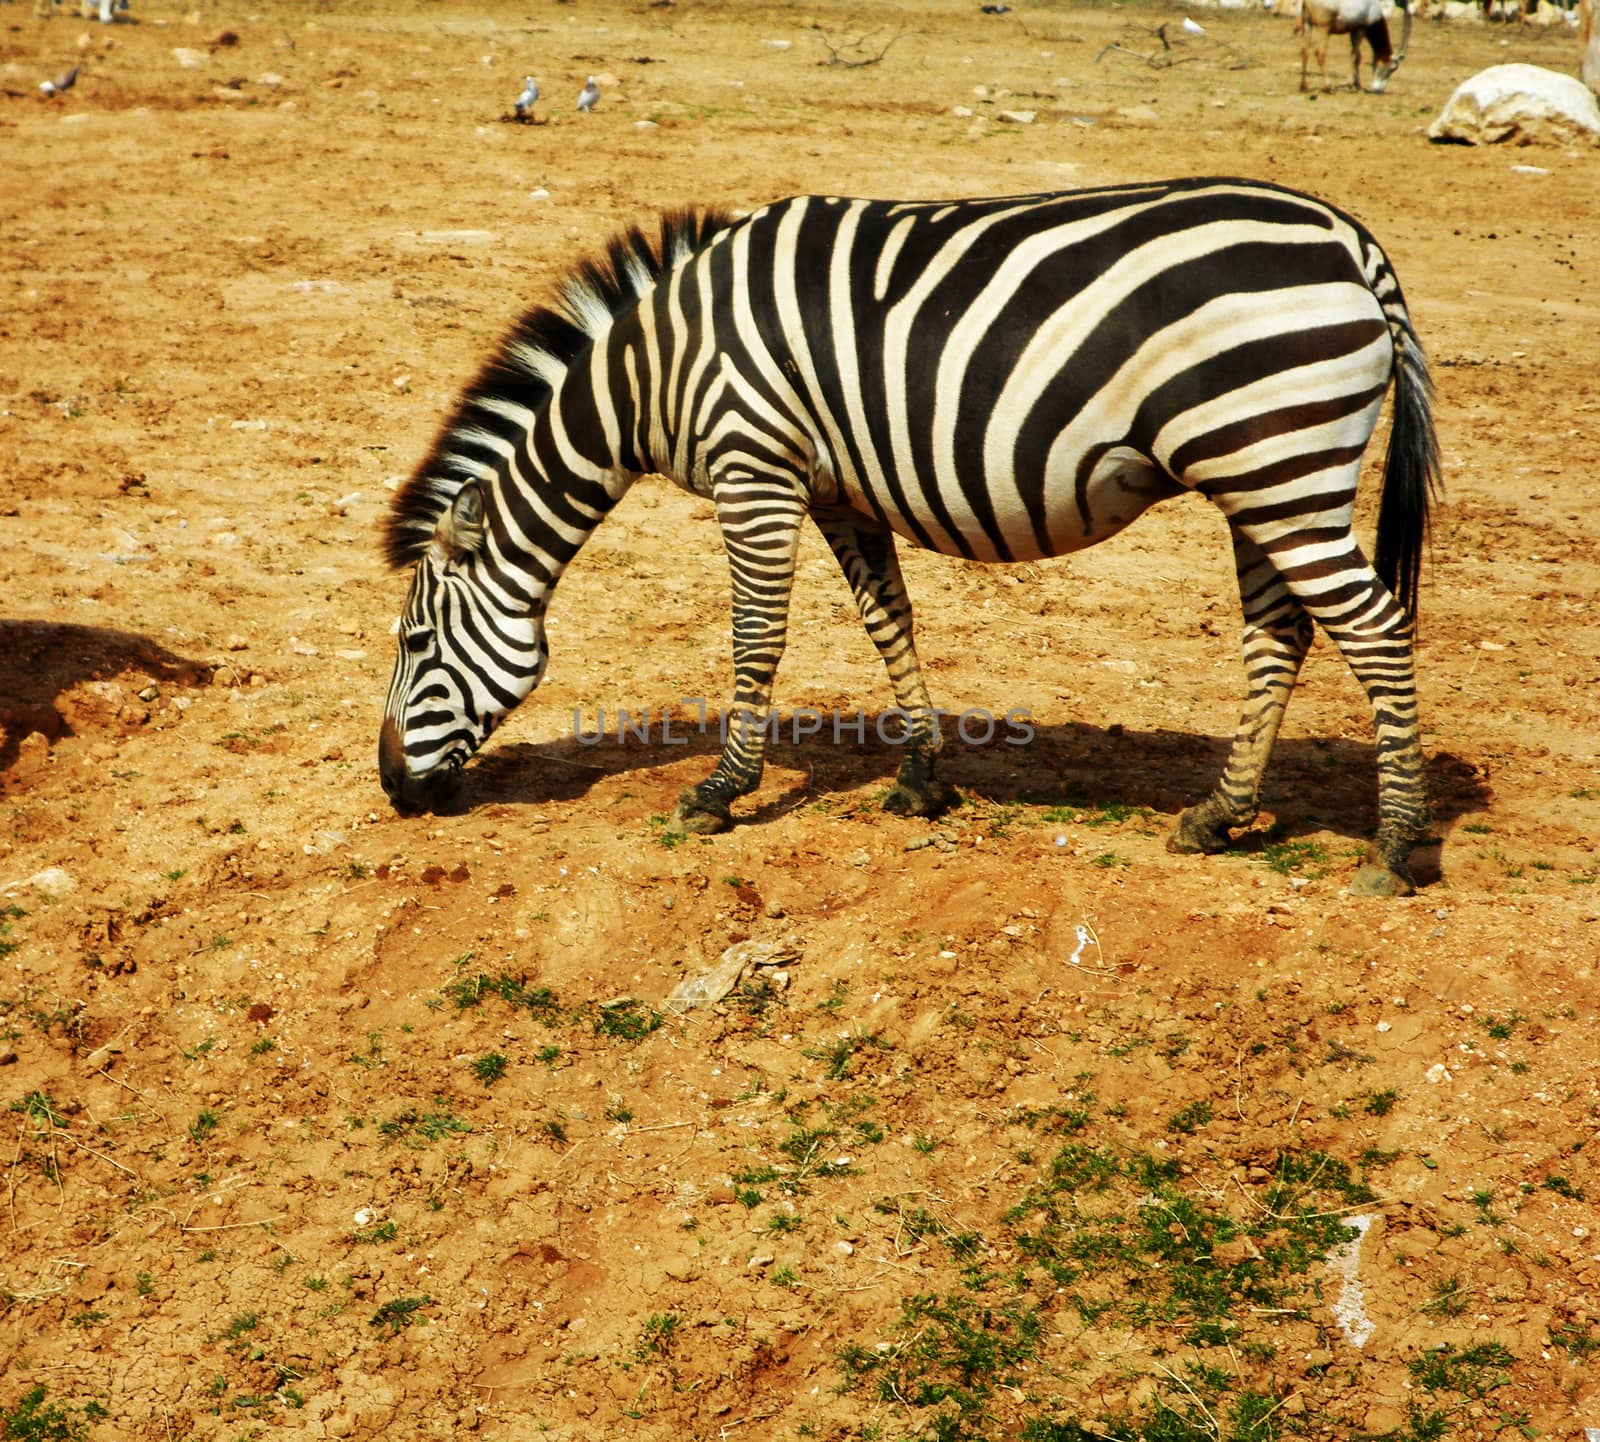 OLYMPUS DIGITAL CAMERAClose up view of a zebra.

Picture taken on March 13, 2011.